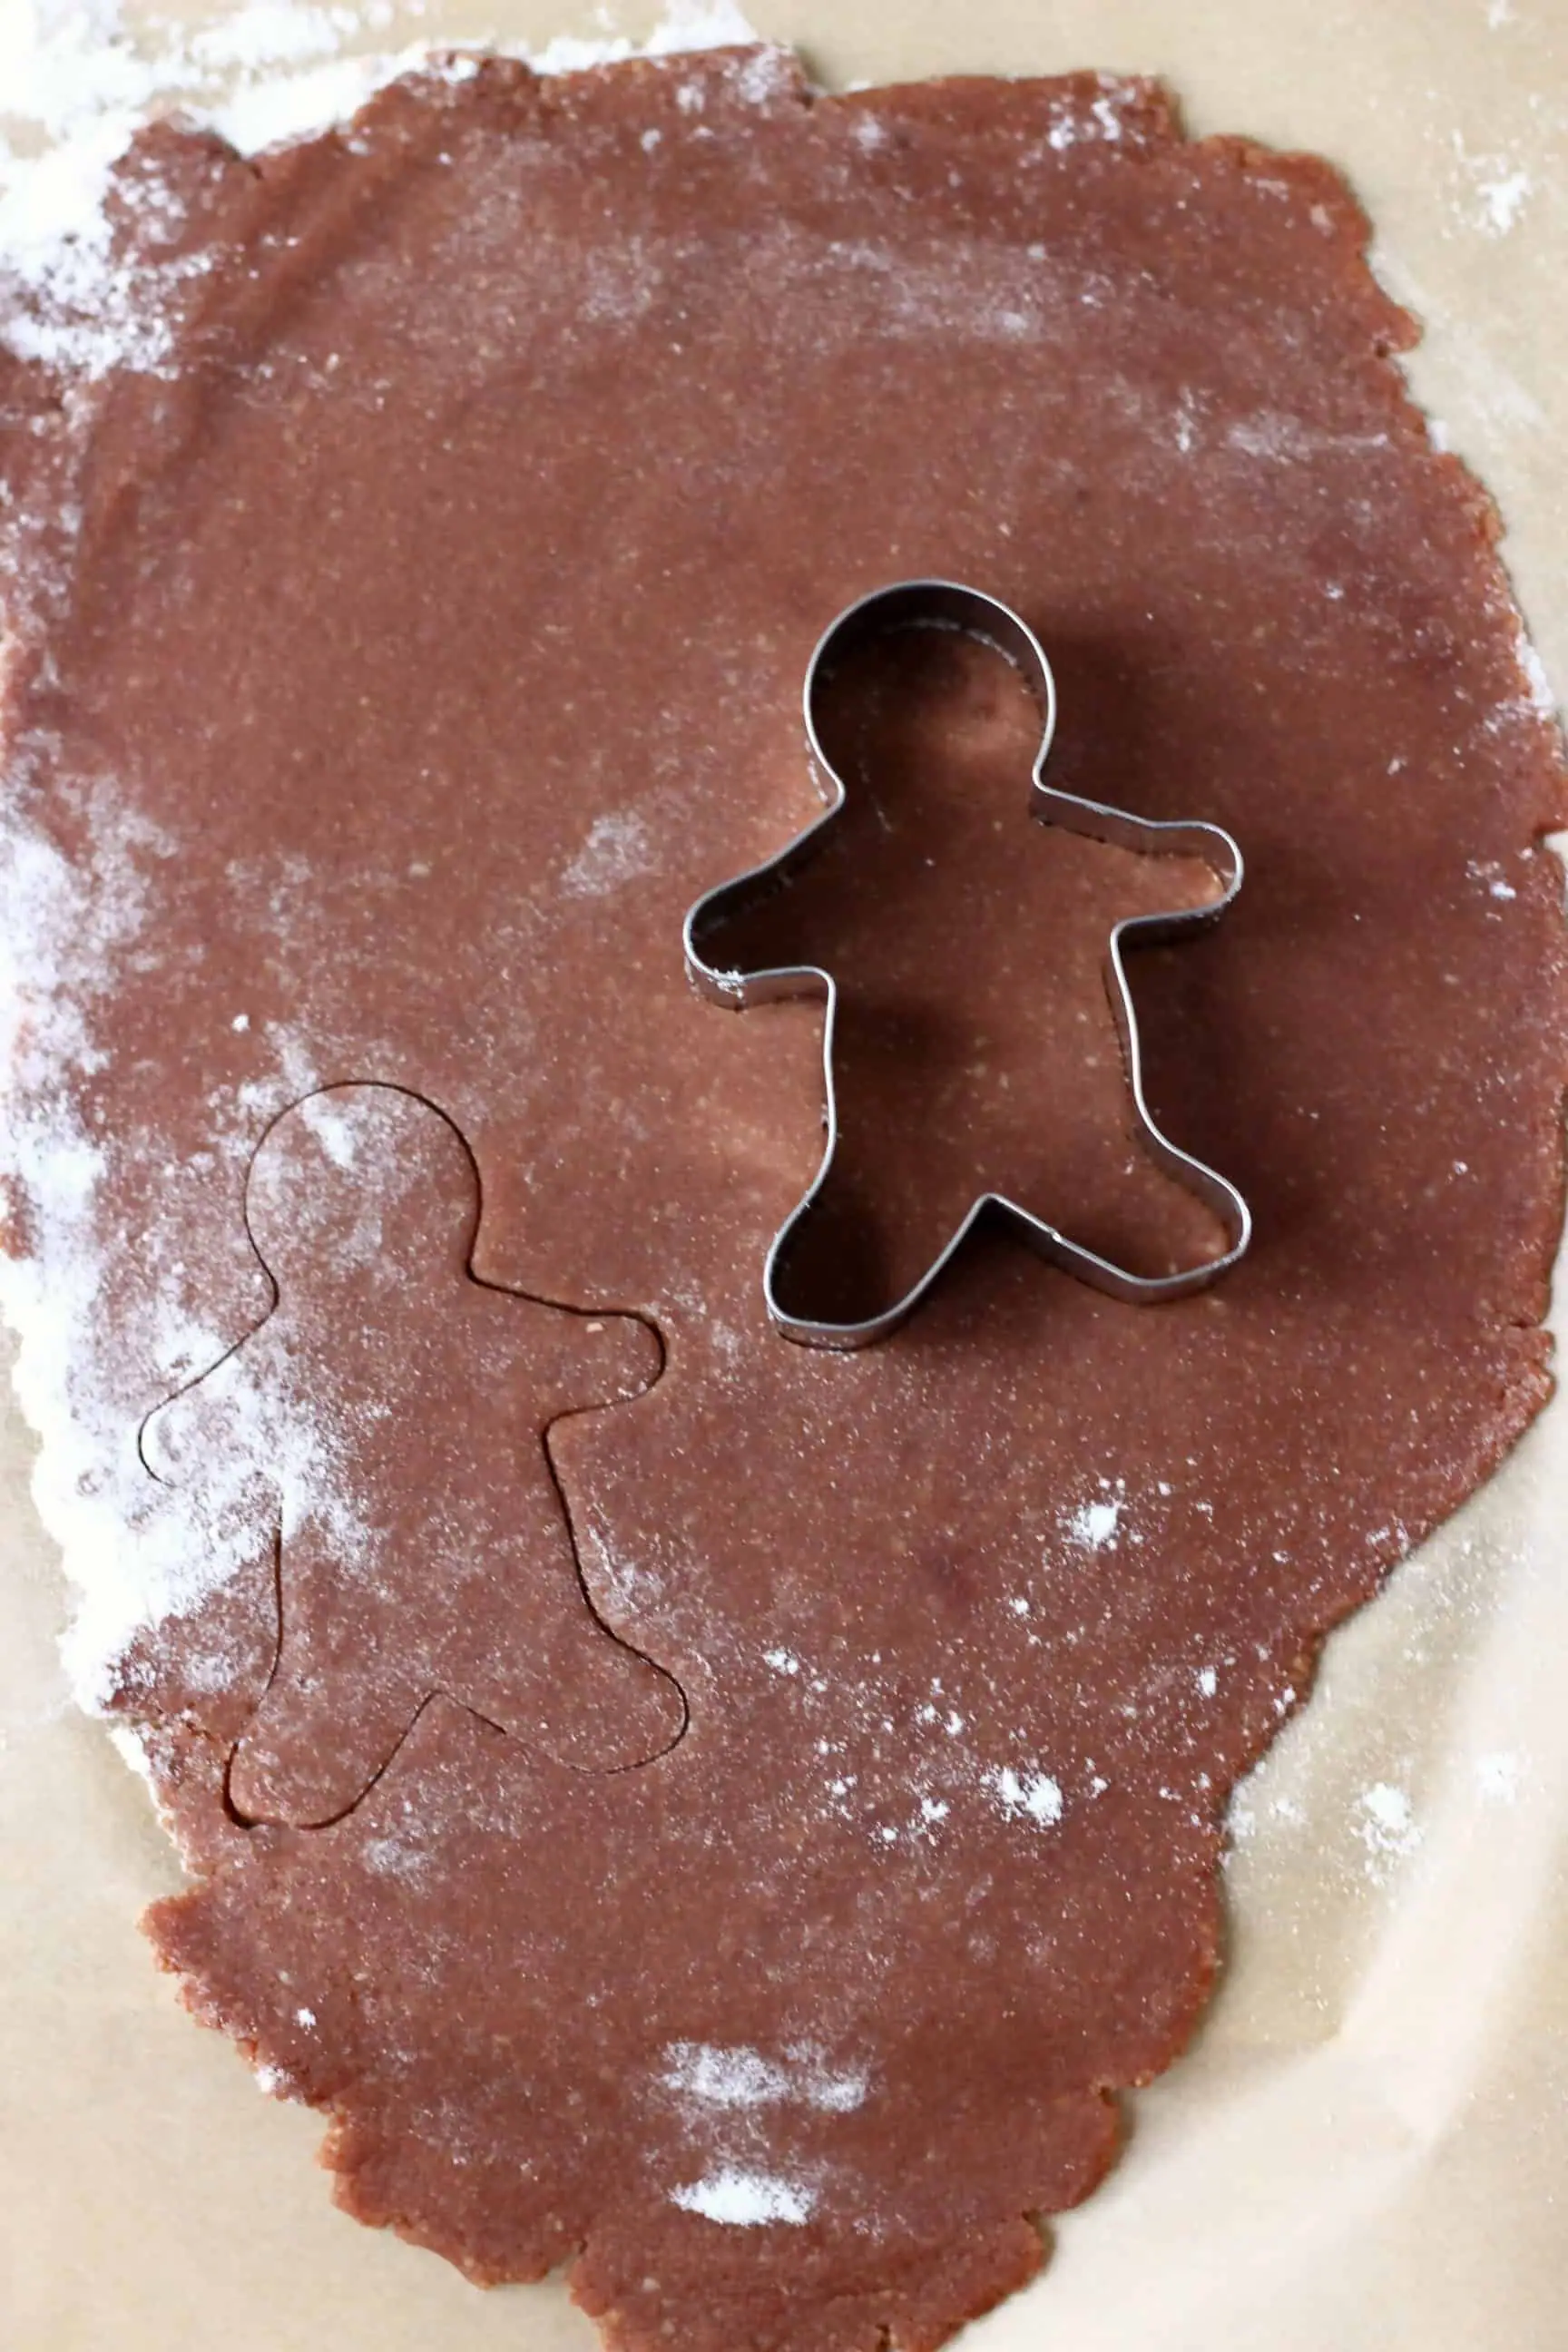 Raw gluten-free vegan gingerbread cookie dough on a sheet of baking paper with a silver gingerbread man cookie cutter 